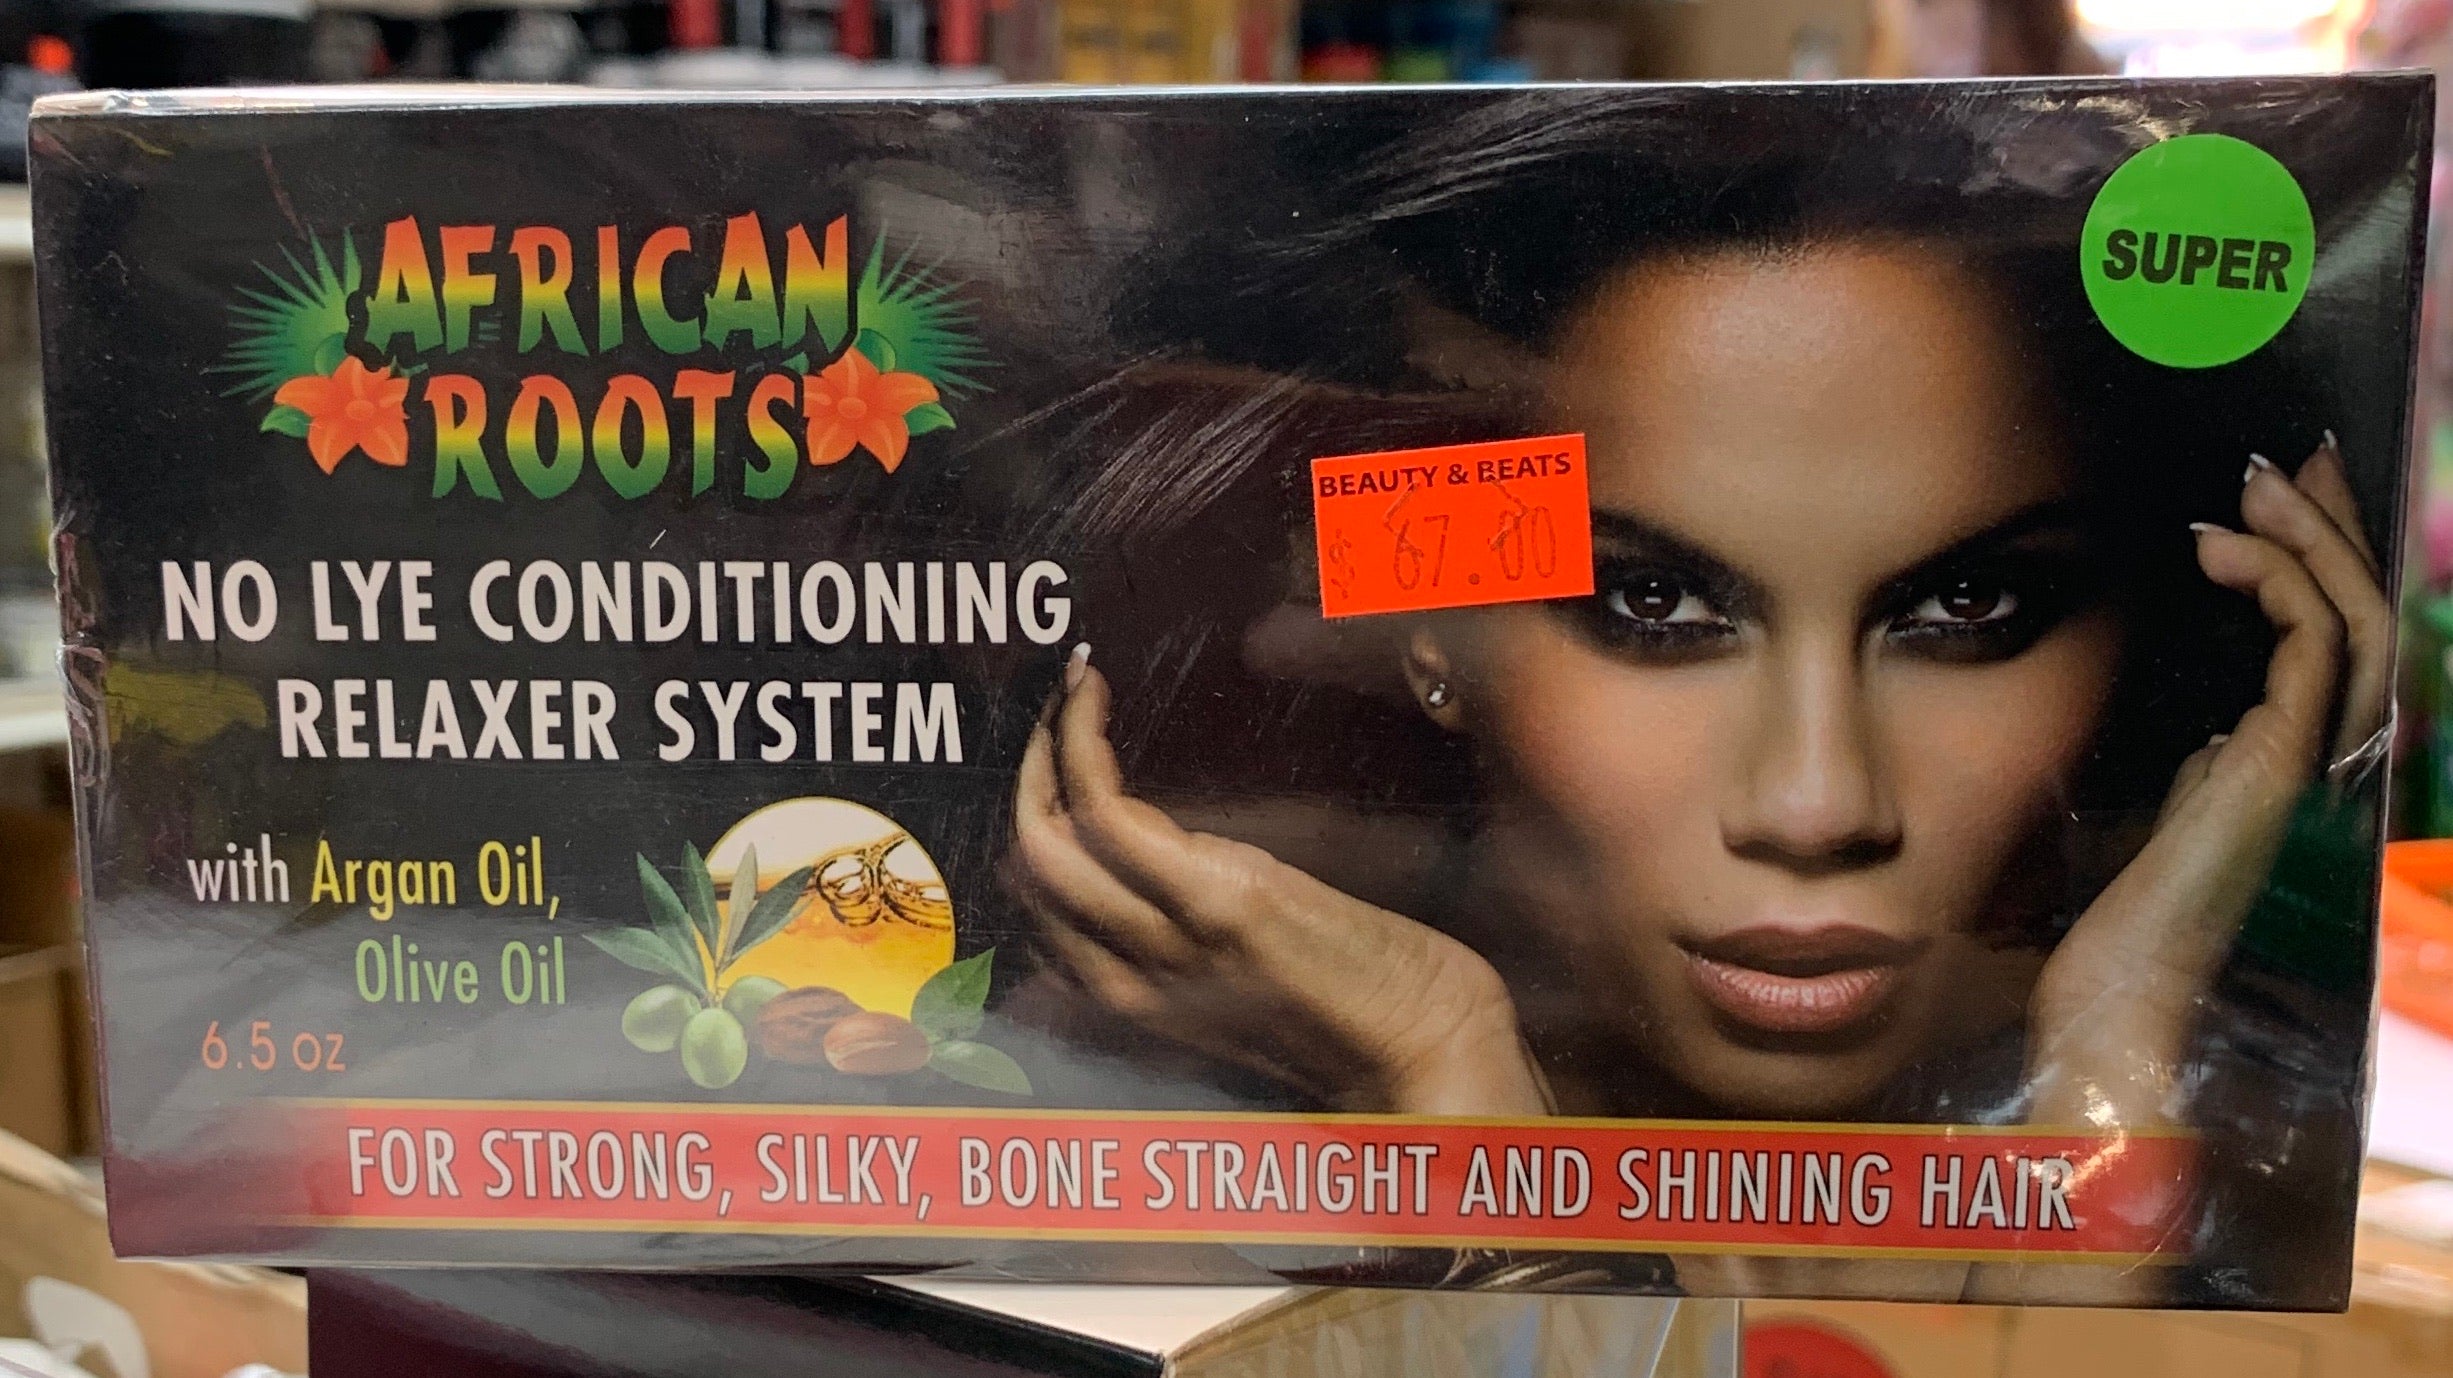 African roots relaxer system super 6.5oz